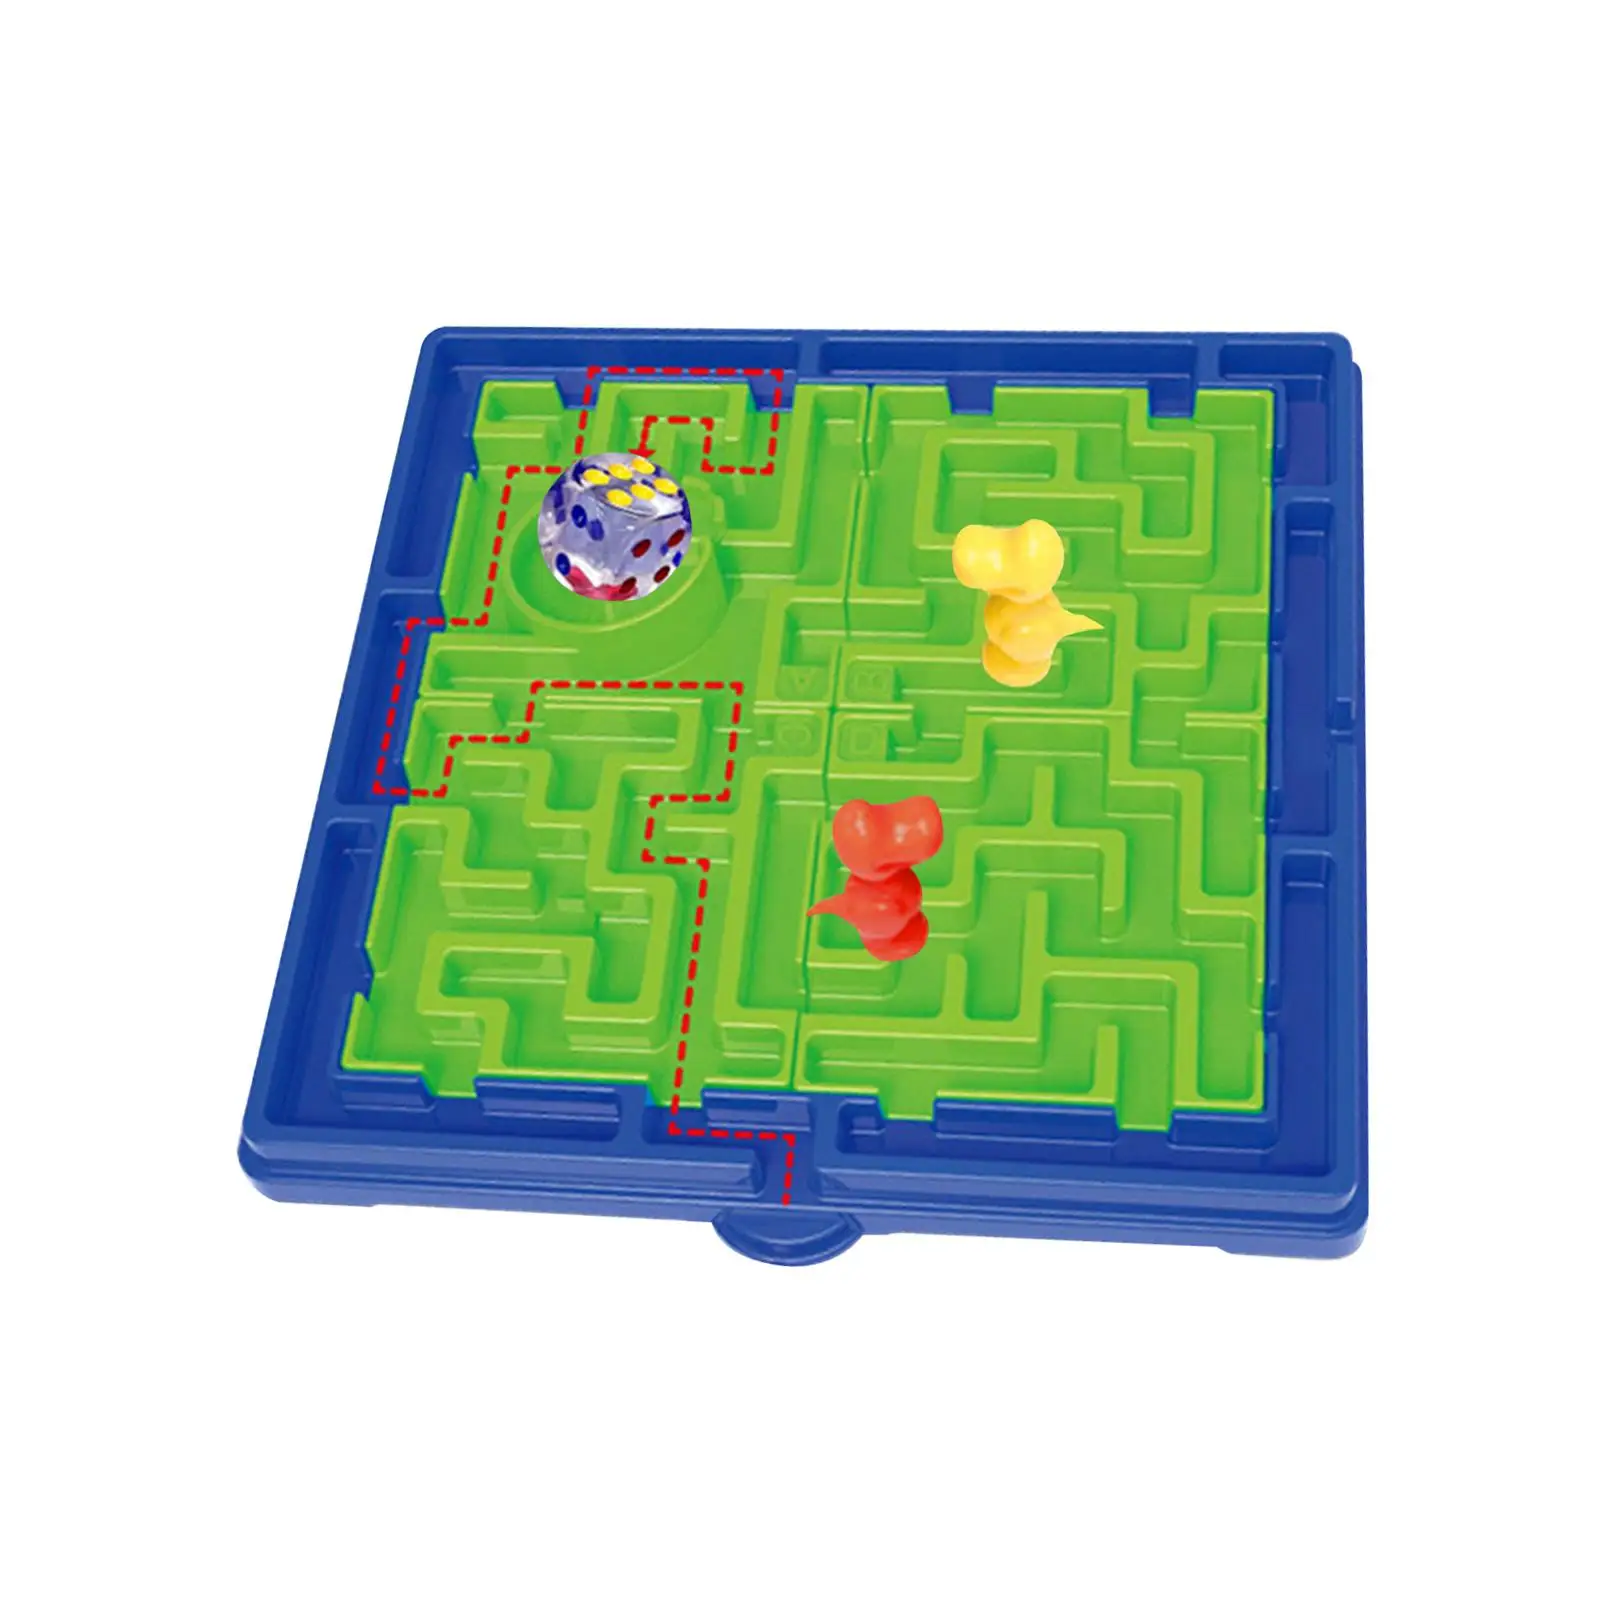 Maze Board Game Balance Maze Interactive Toy Fine Motor Skills Learning Gifts Early Education Toys Labyrinth Game for Preschool